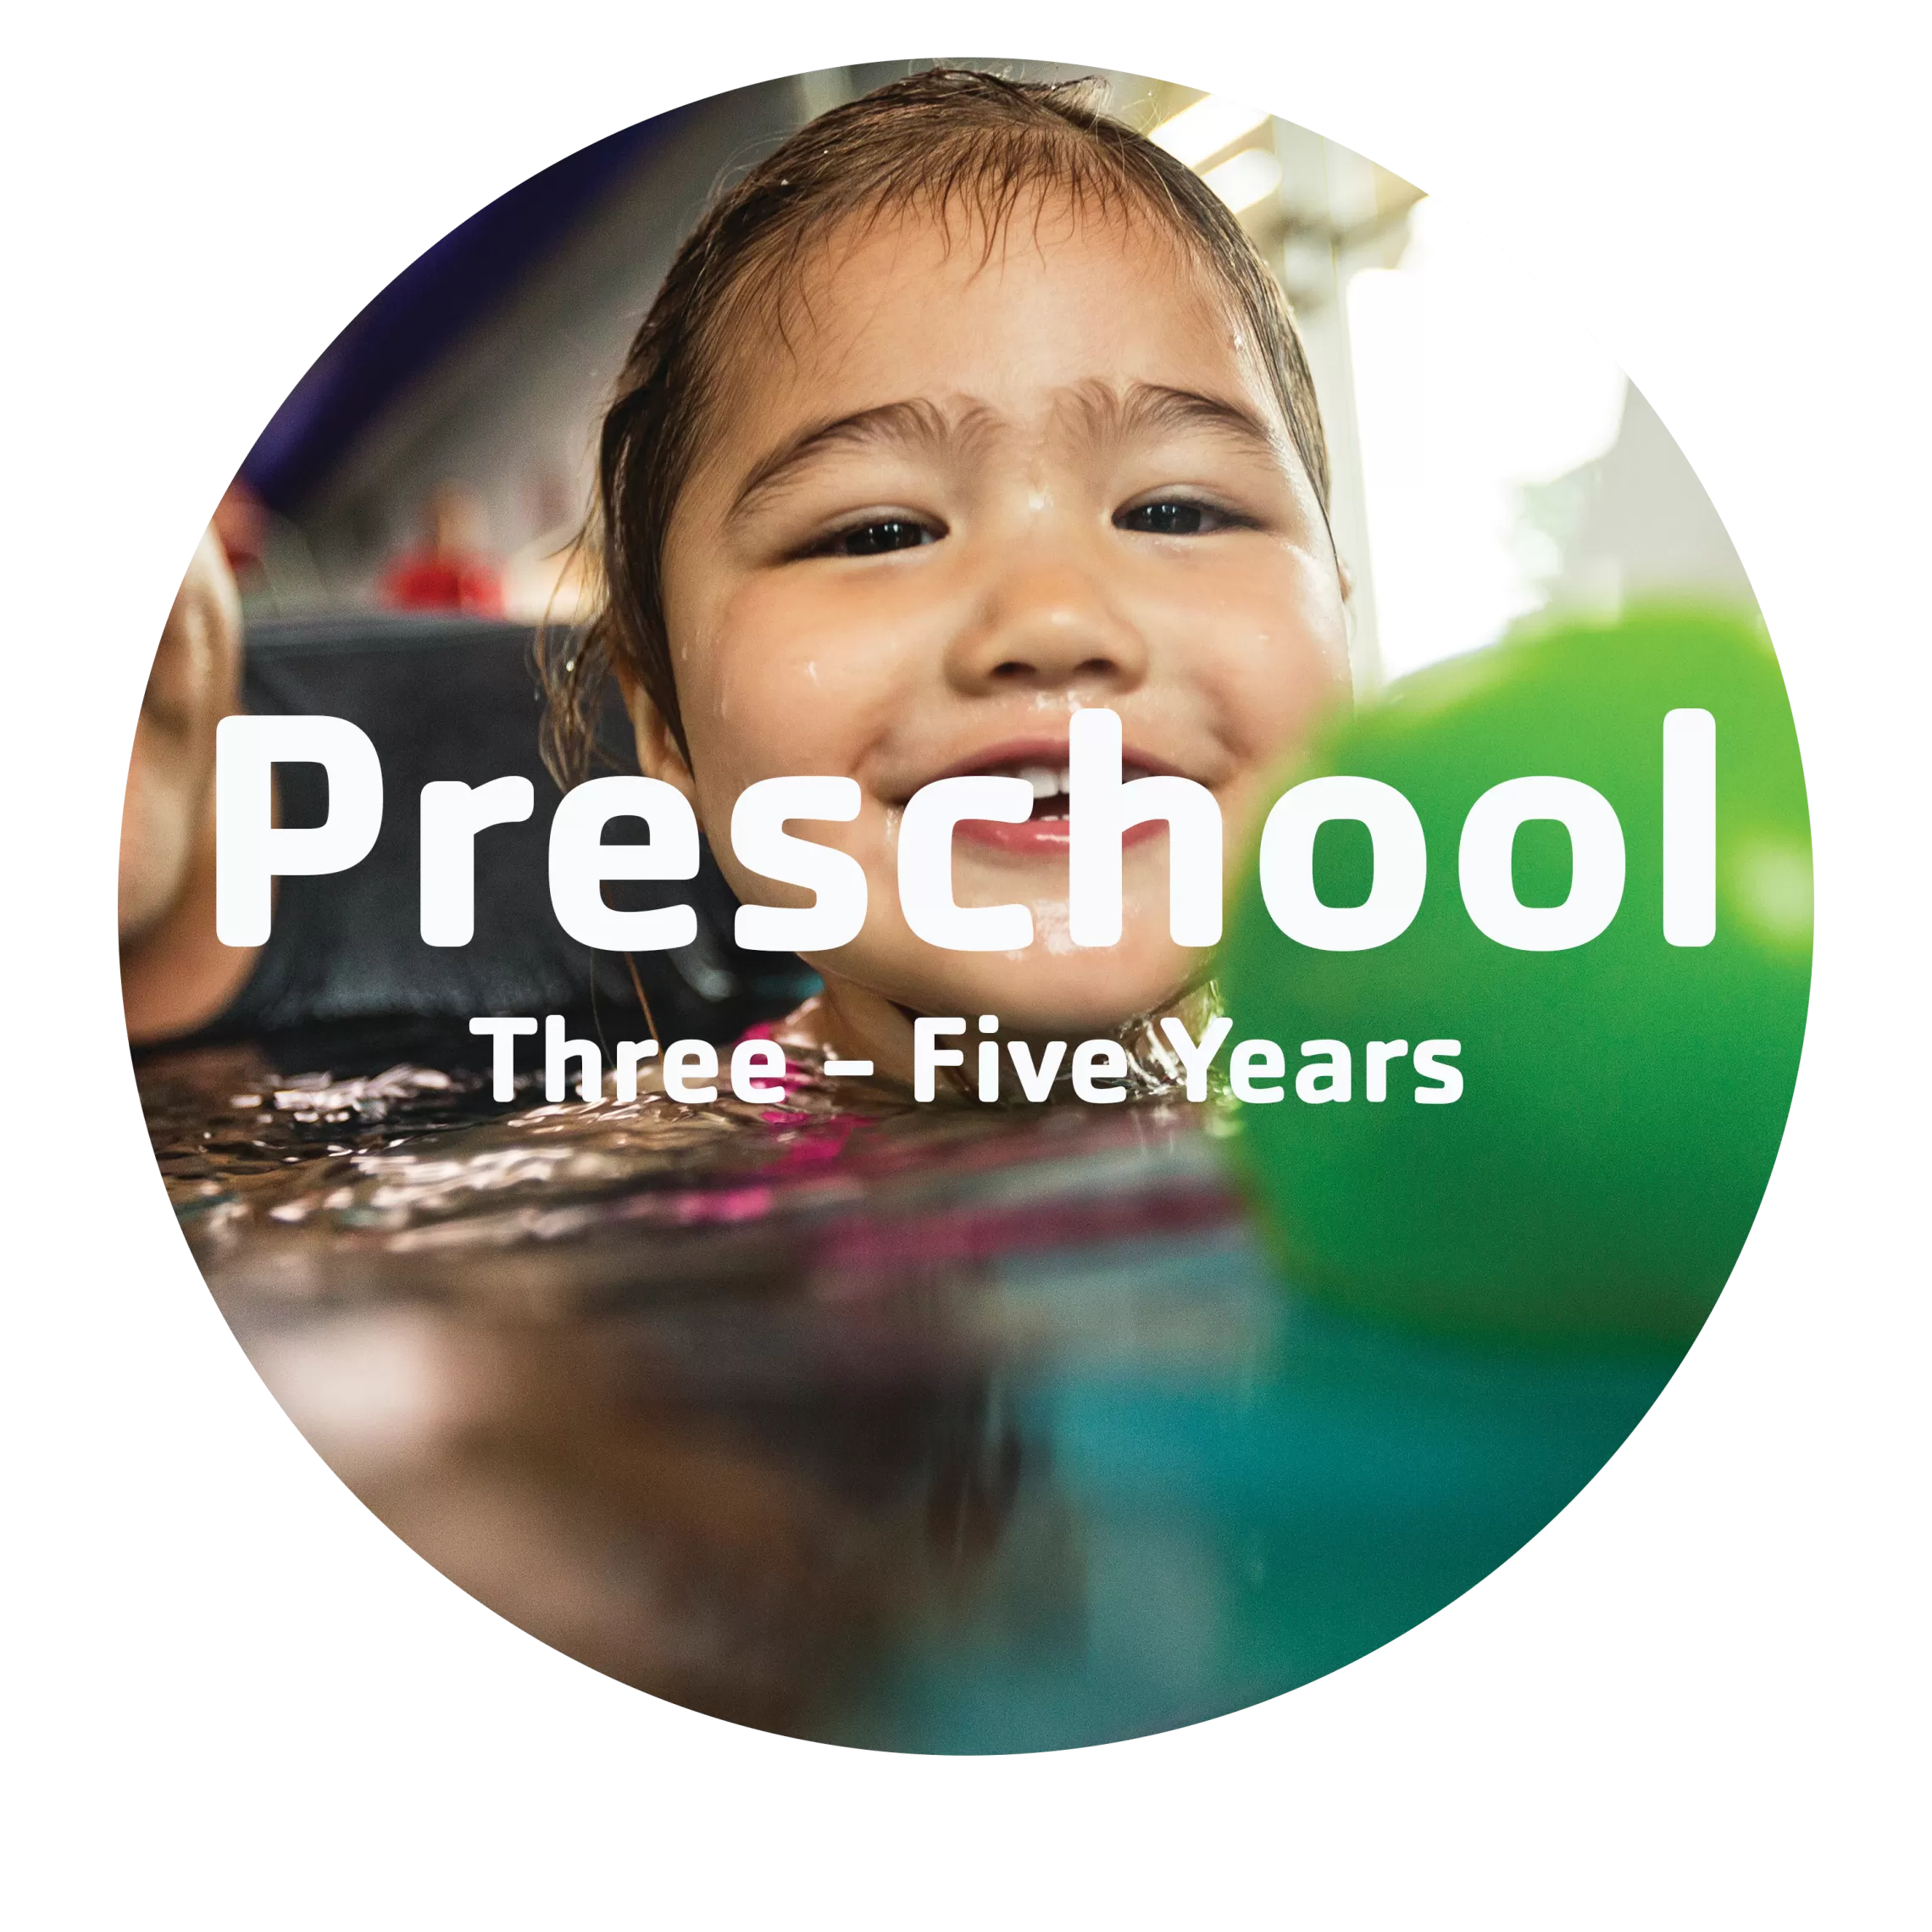 preschool swim assessment ages three to five years old—click to learn more